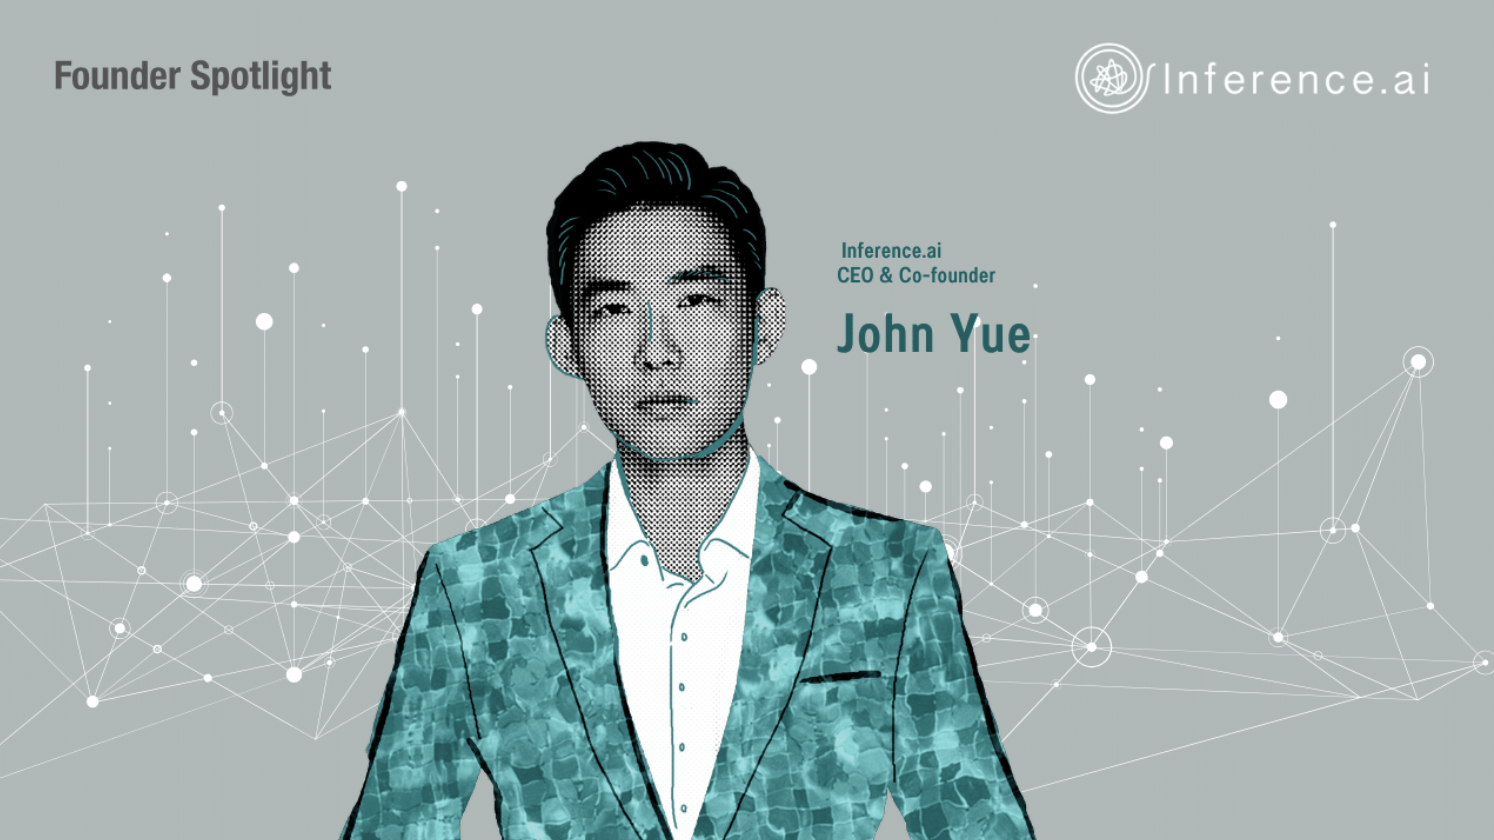 (John Yue, the founder and CEO of Inference.ai. Credit: Cherubic Ventures)